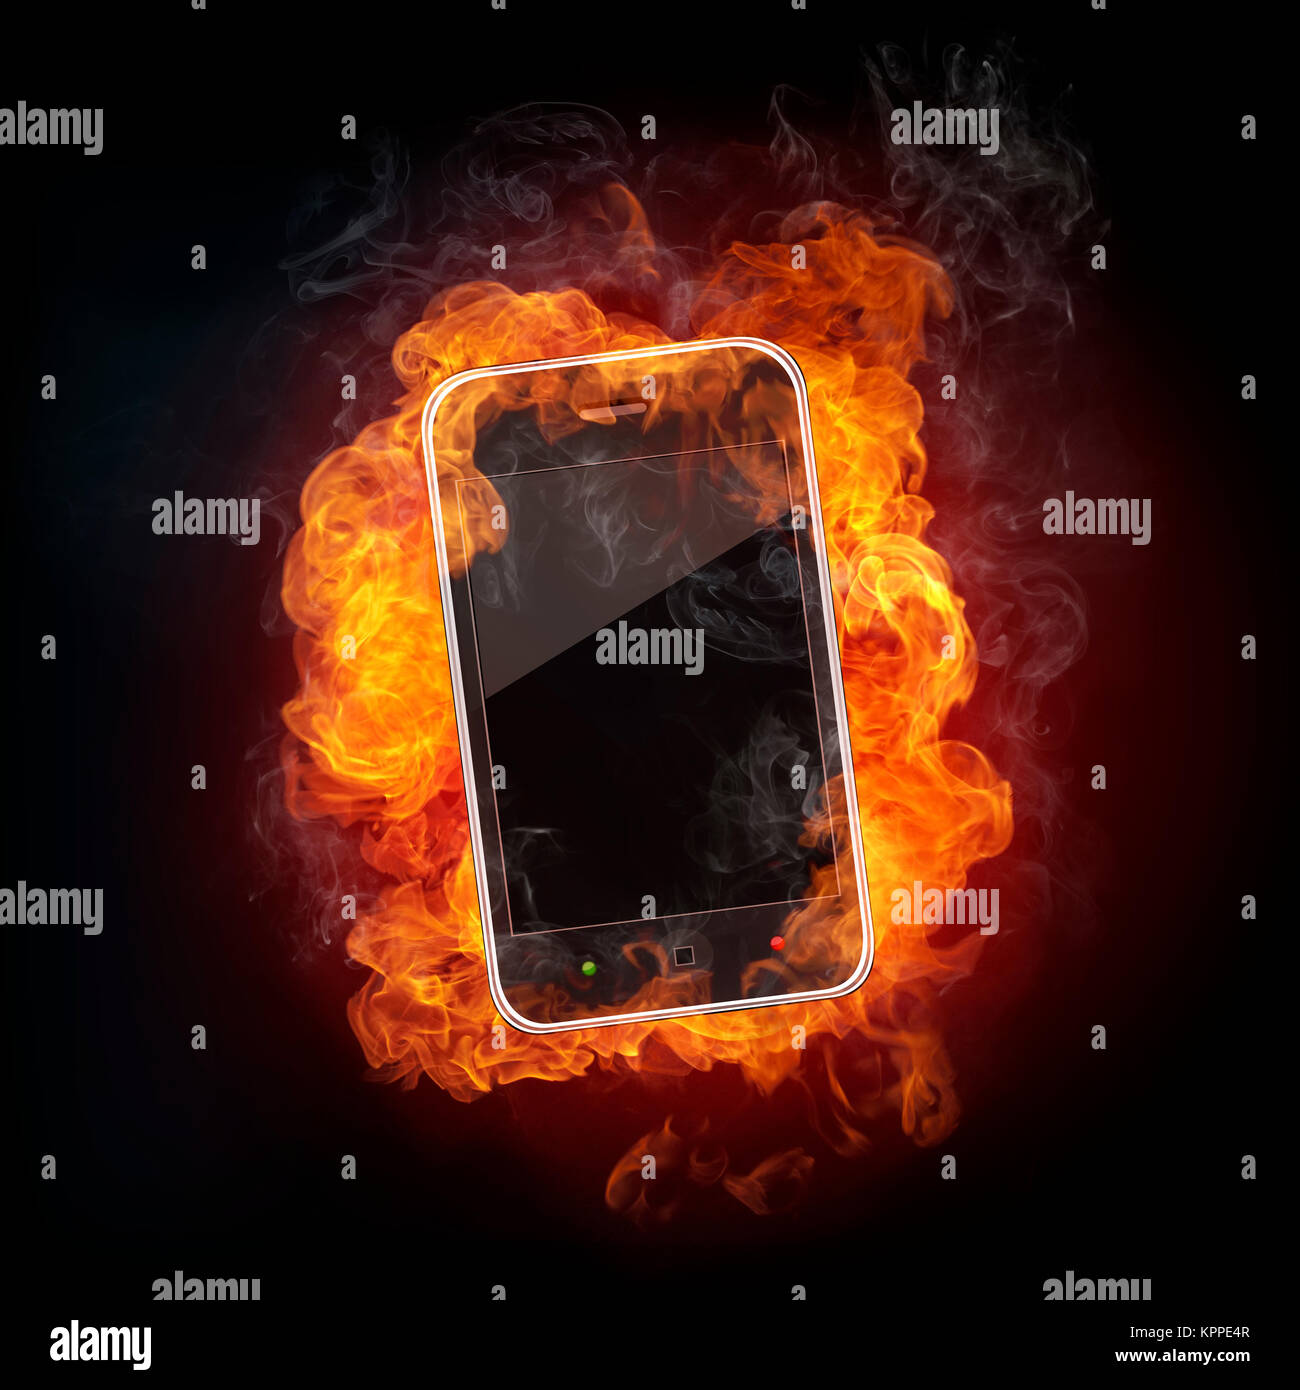 Smartphone in fire Isolated on Black Background. Stock Photo